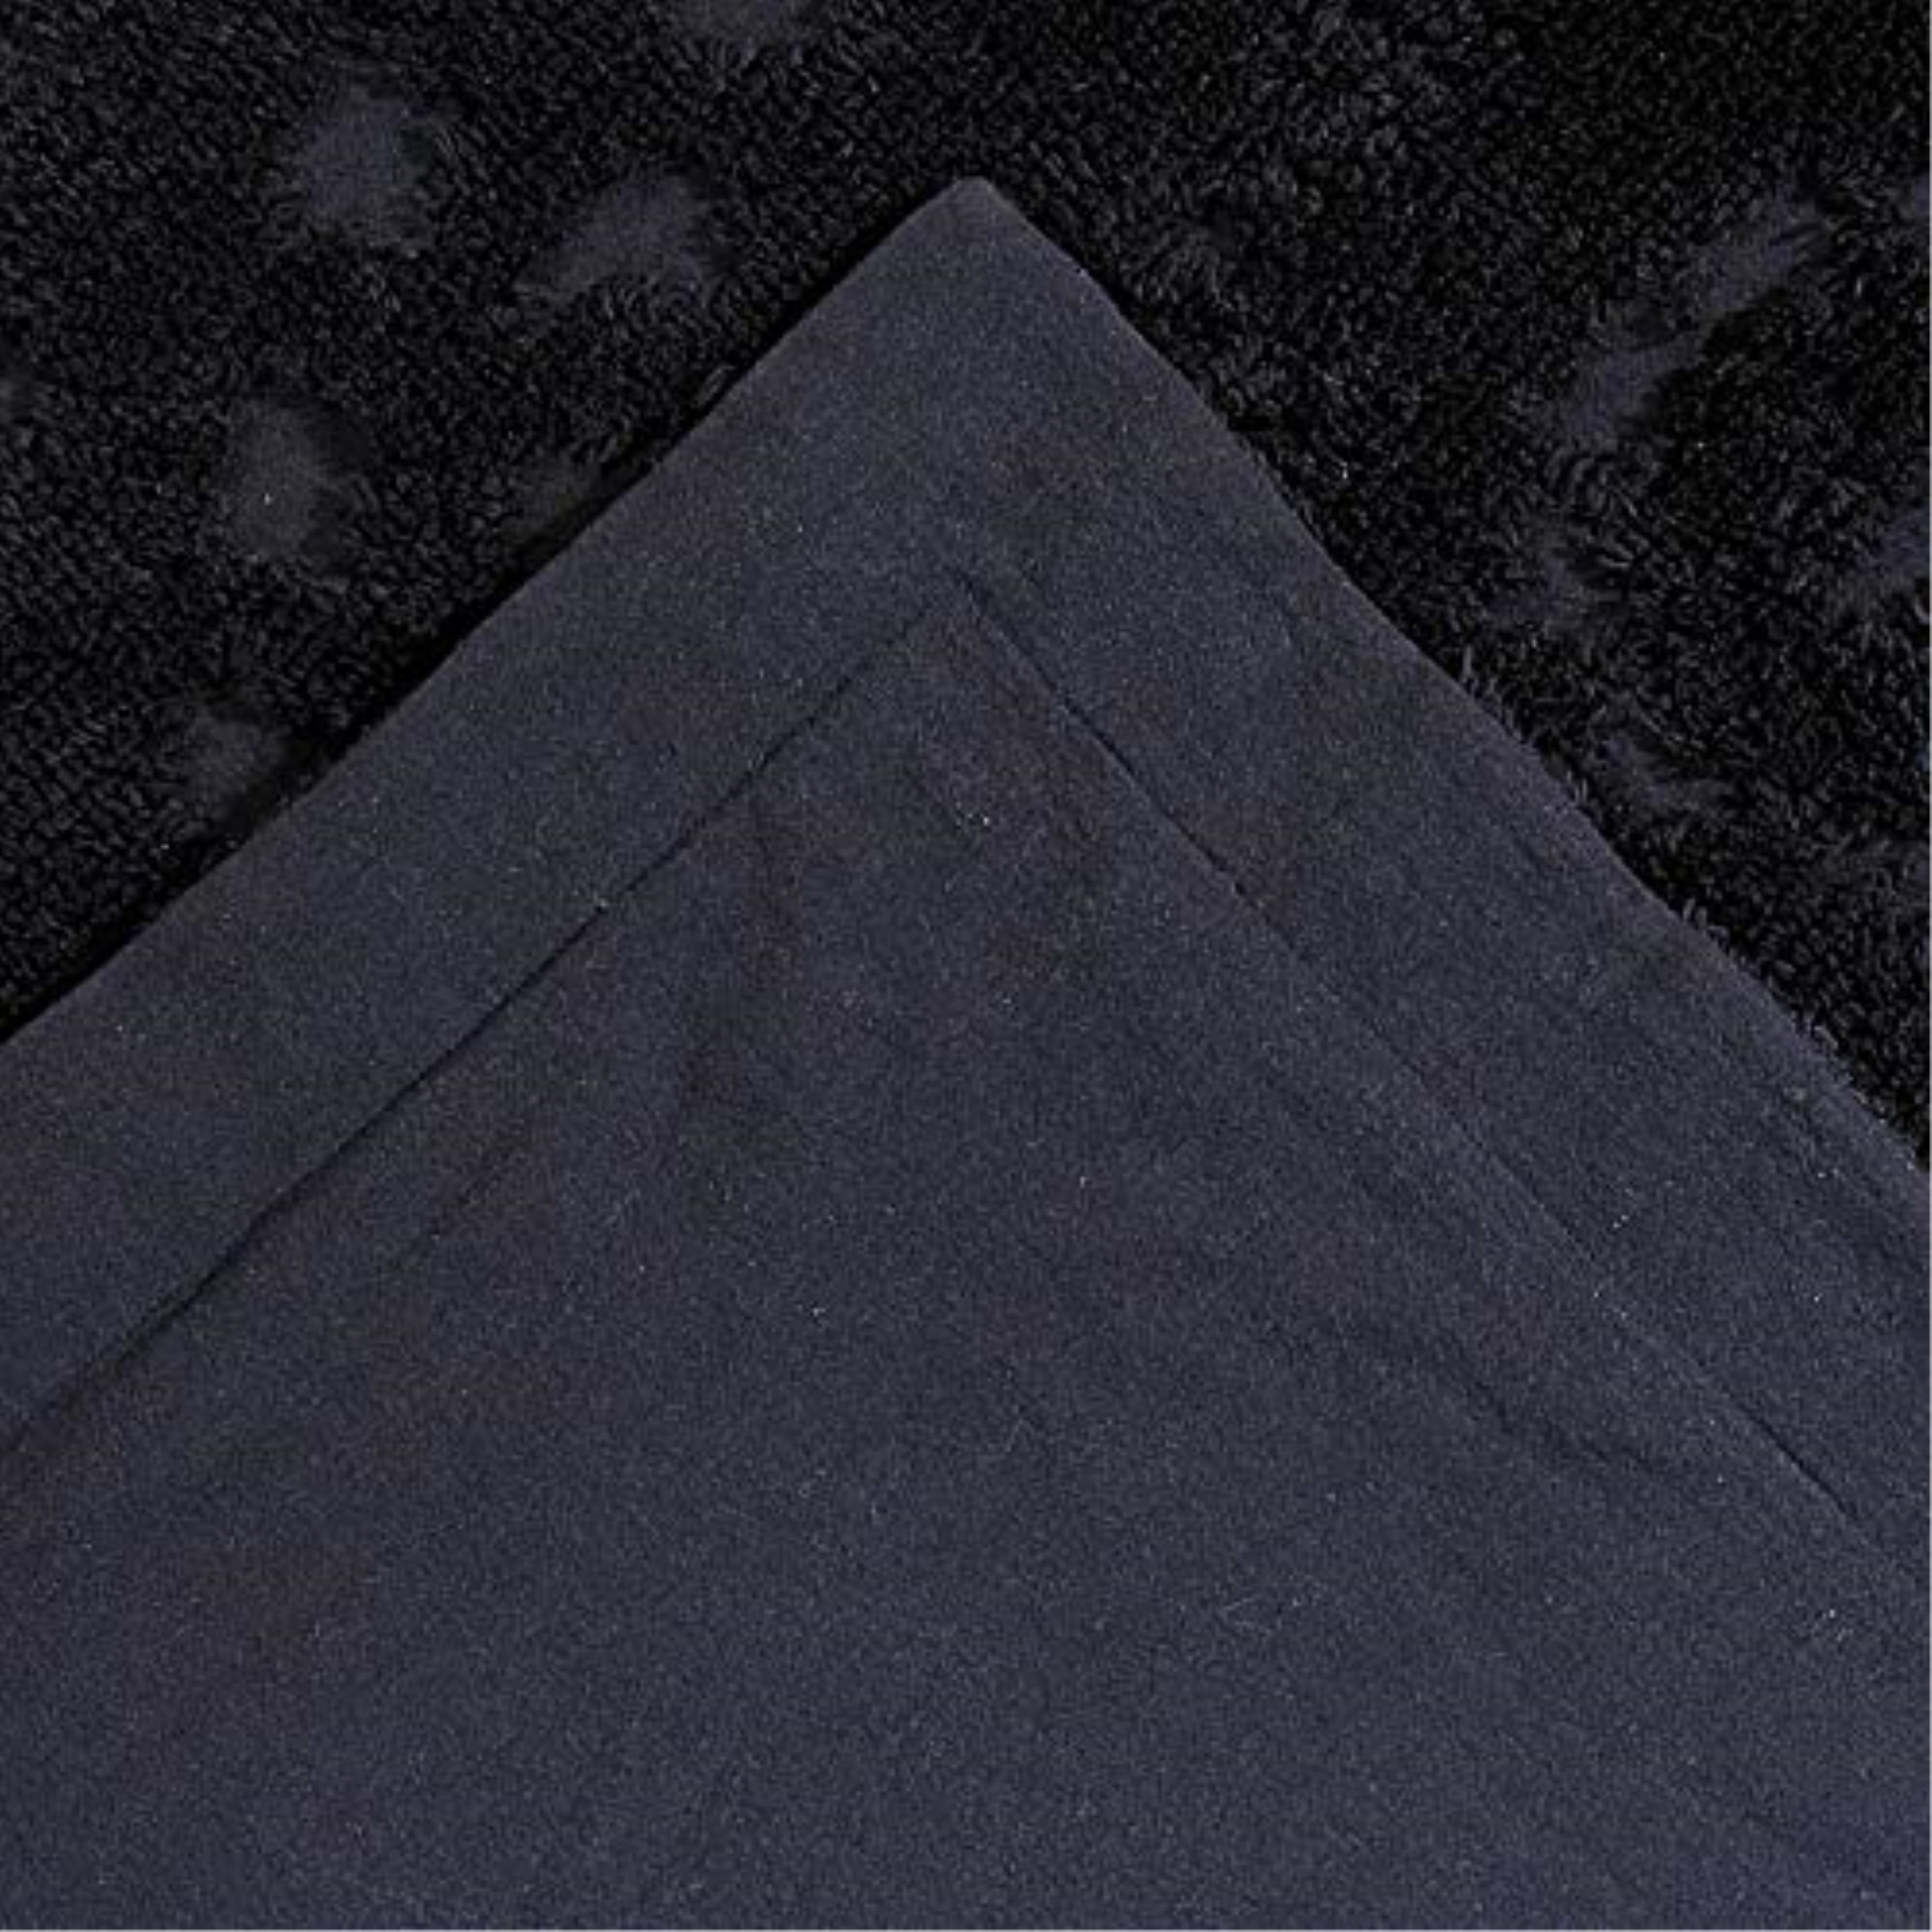 Better Trends Rio Collection Euro Sham in Black